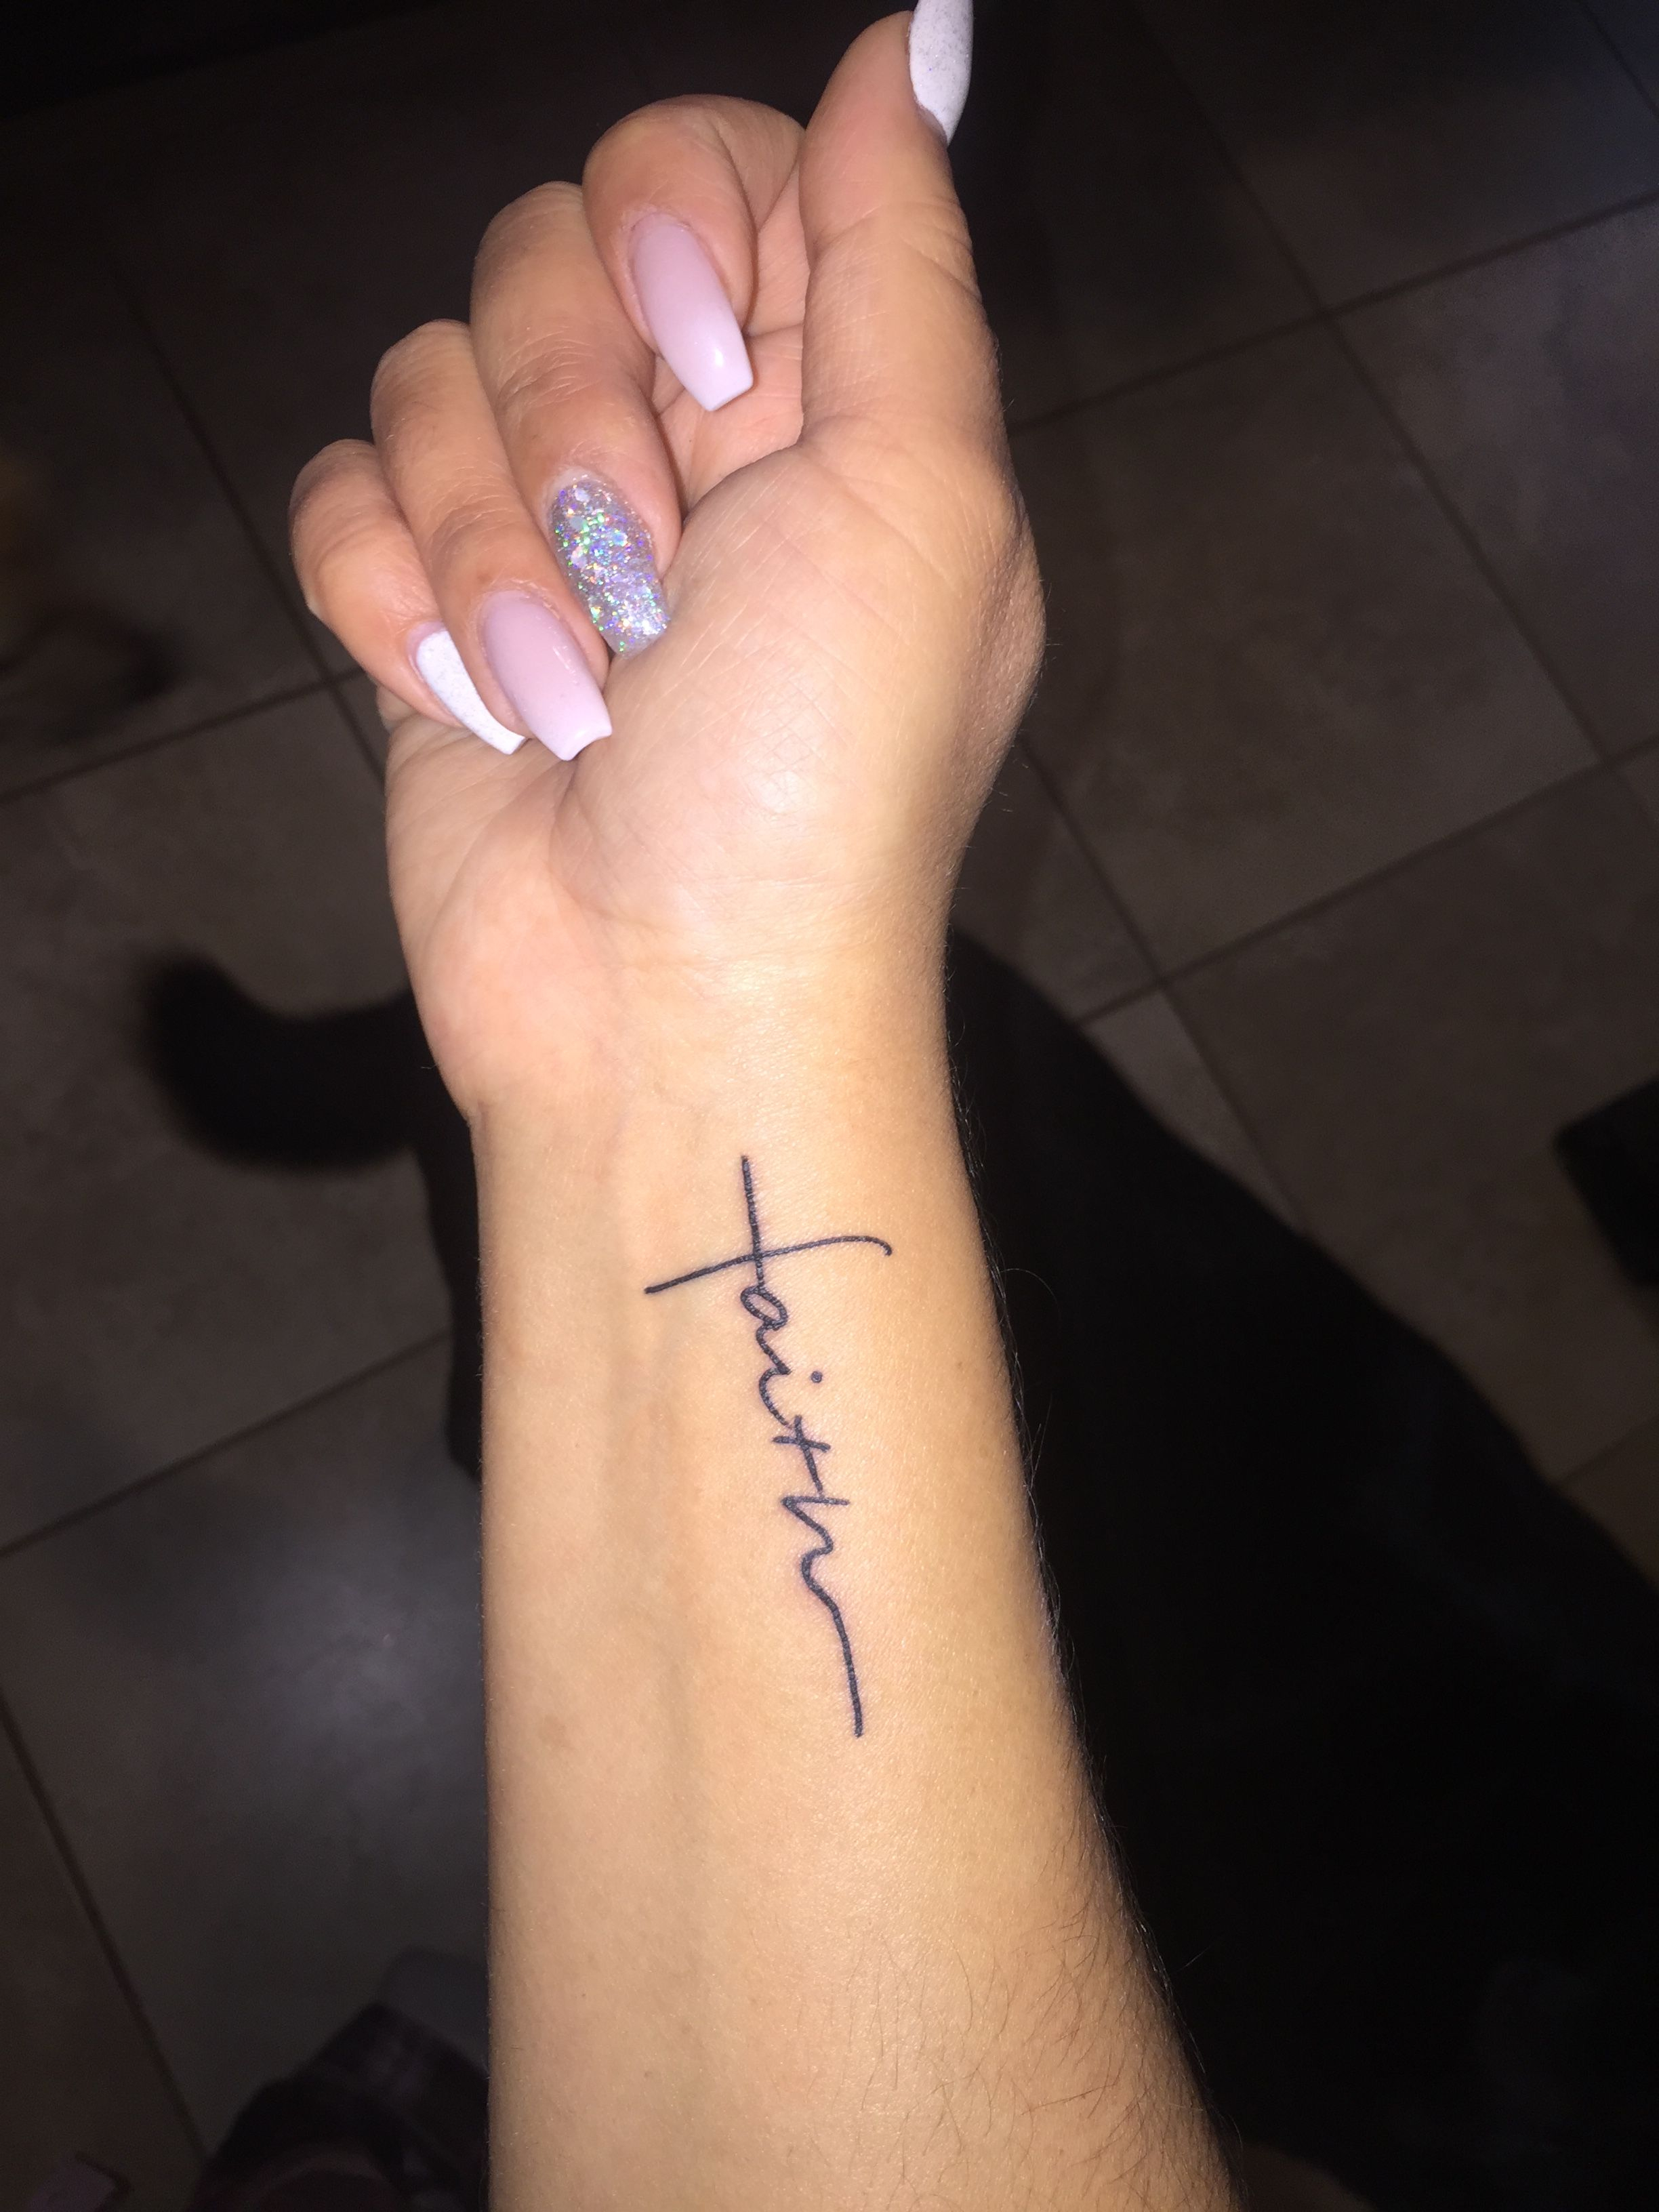 14 Faith Tattoos To Get Inspired Tattoo Me Now intended for proportions 2448 X 3264